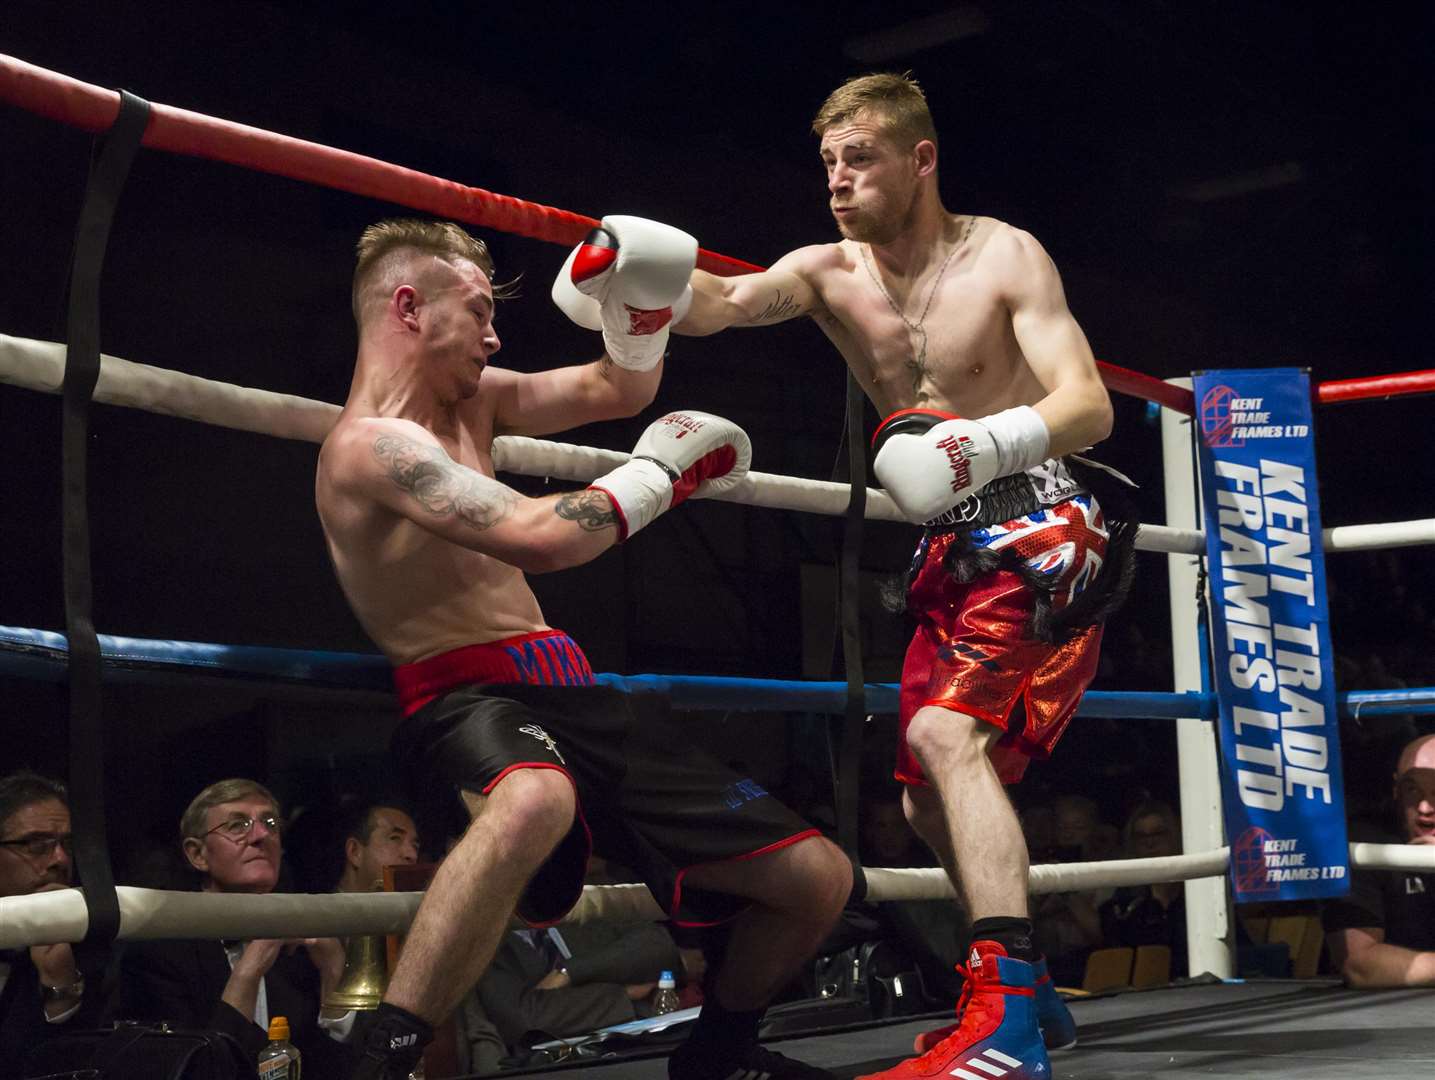 Chris Matthews, right, has Michael Horabin in trouble during their bout last Saturday Picture: Countrywide Photographic